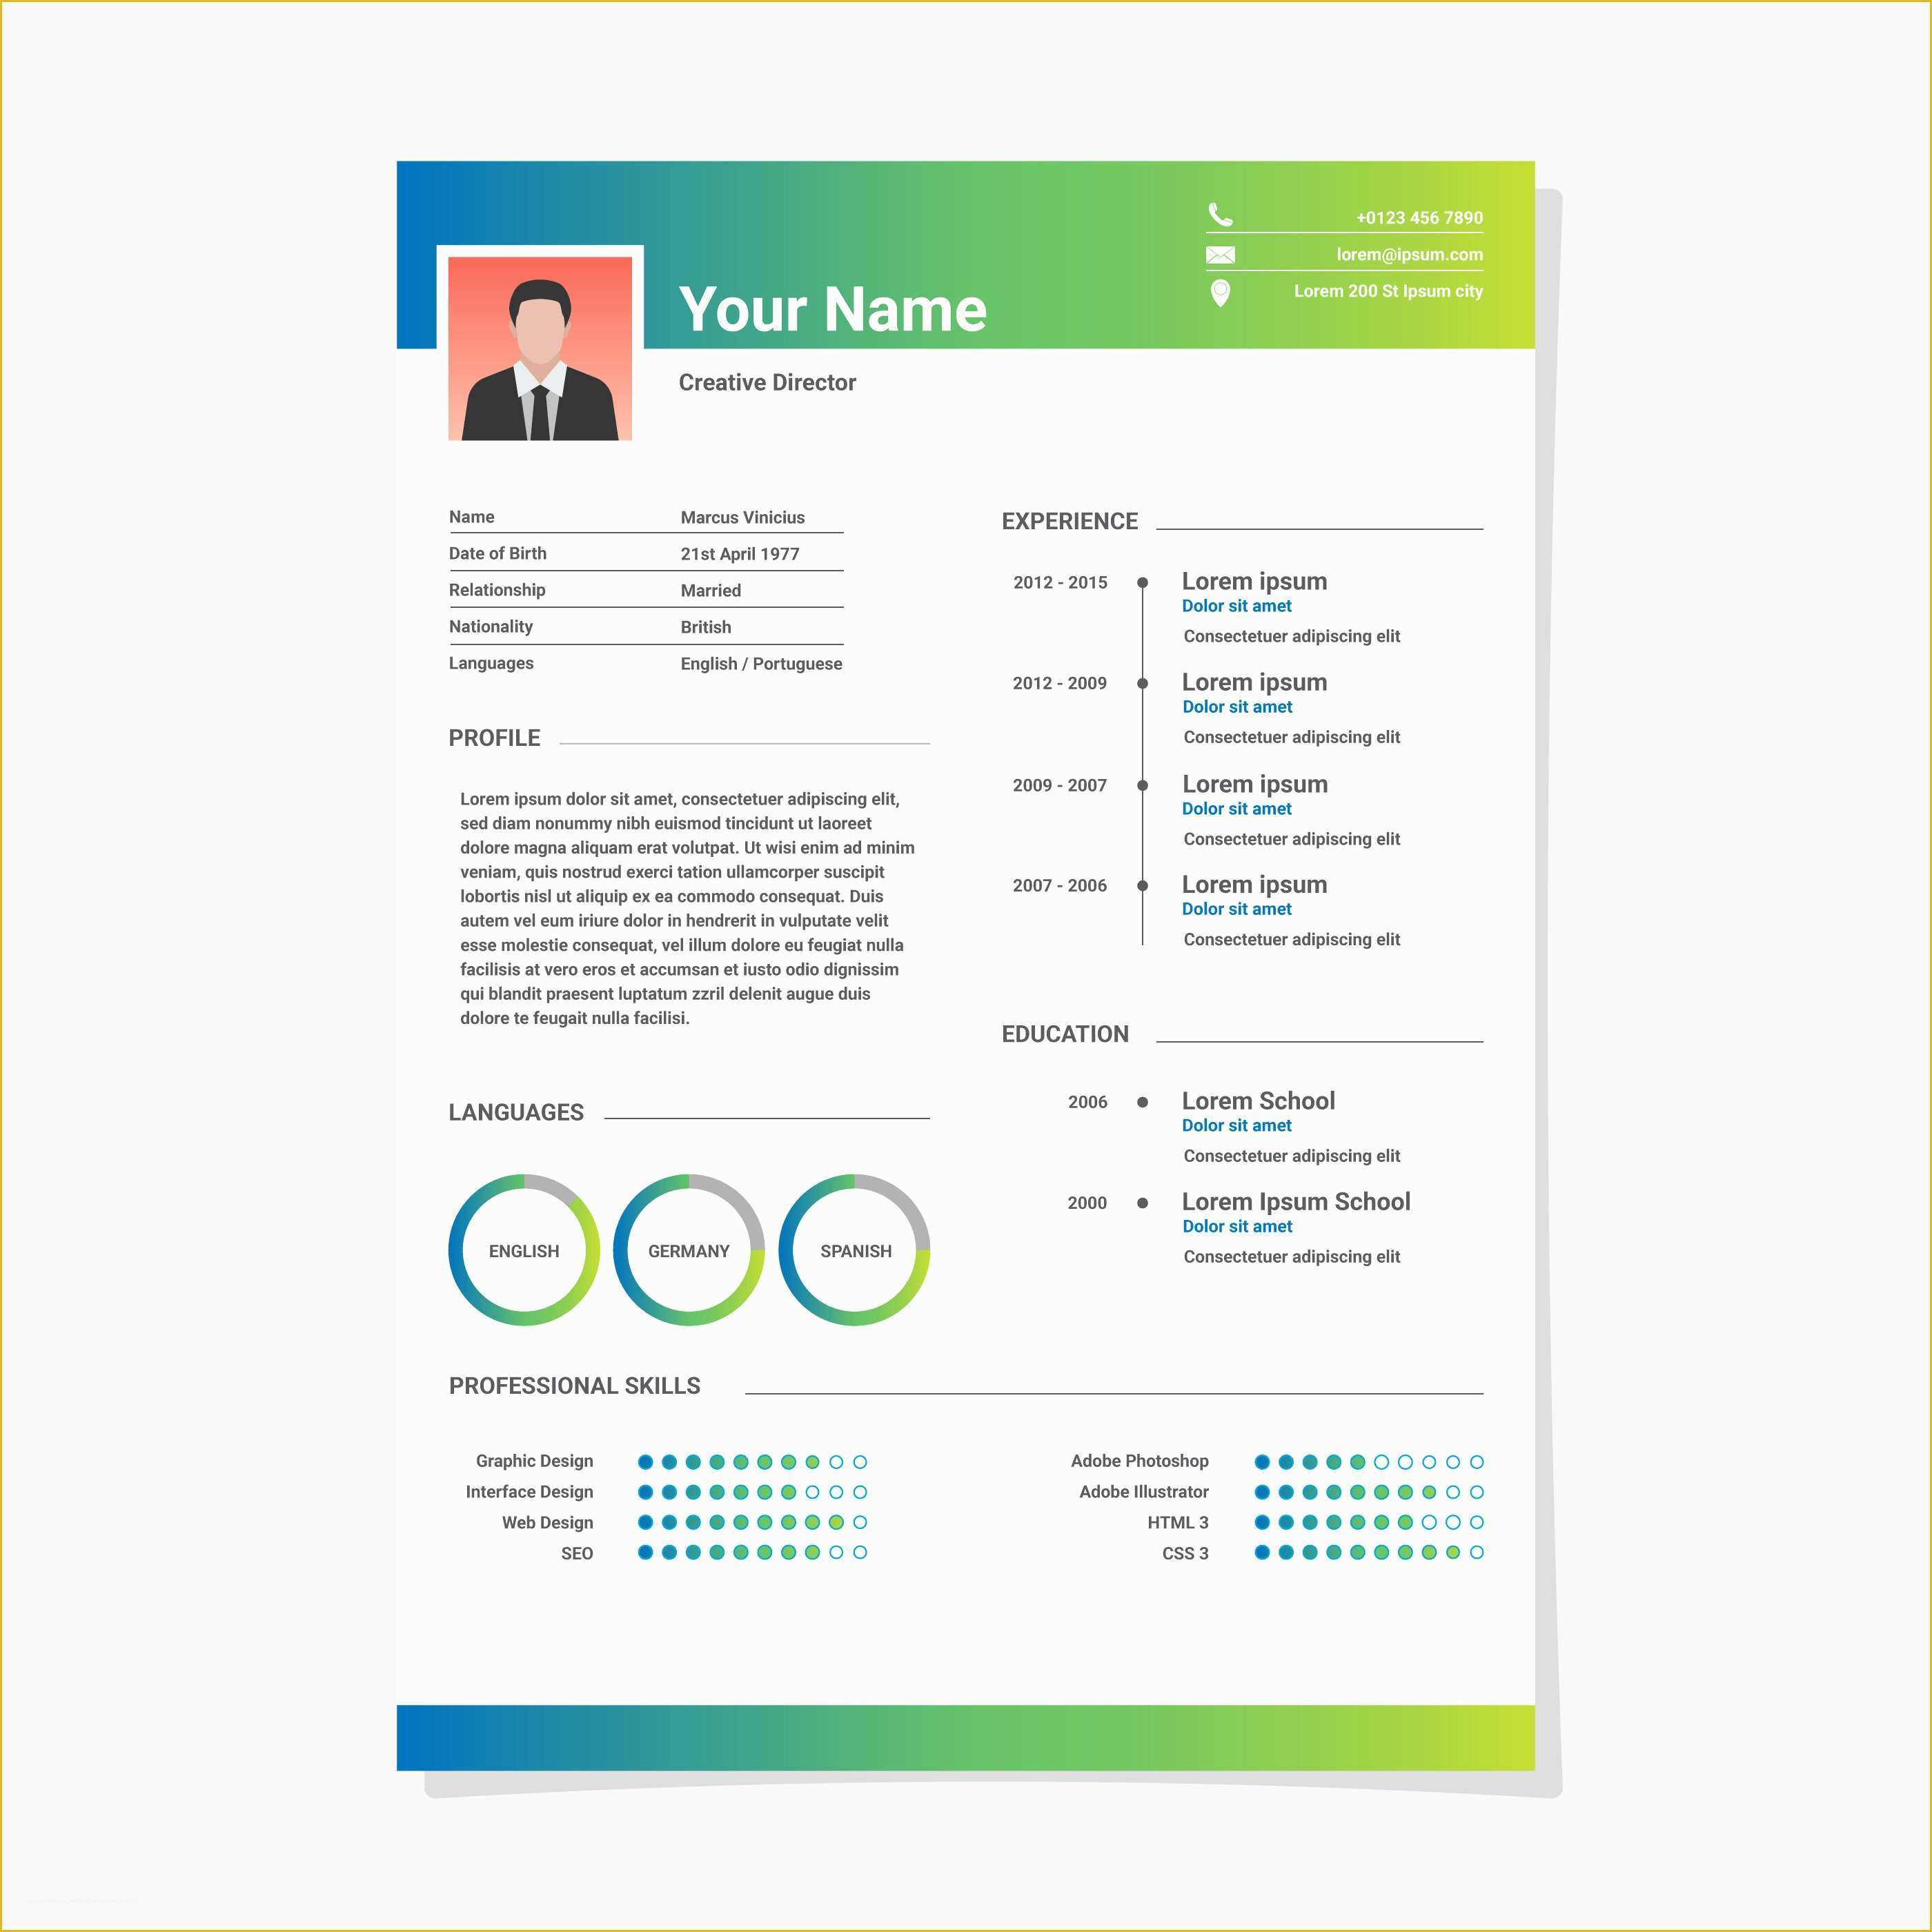 Minimalist Resume Template Free Download Of Resume Minimalist Cv Template Download Free Vector Art